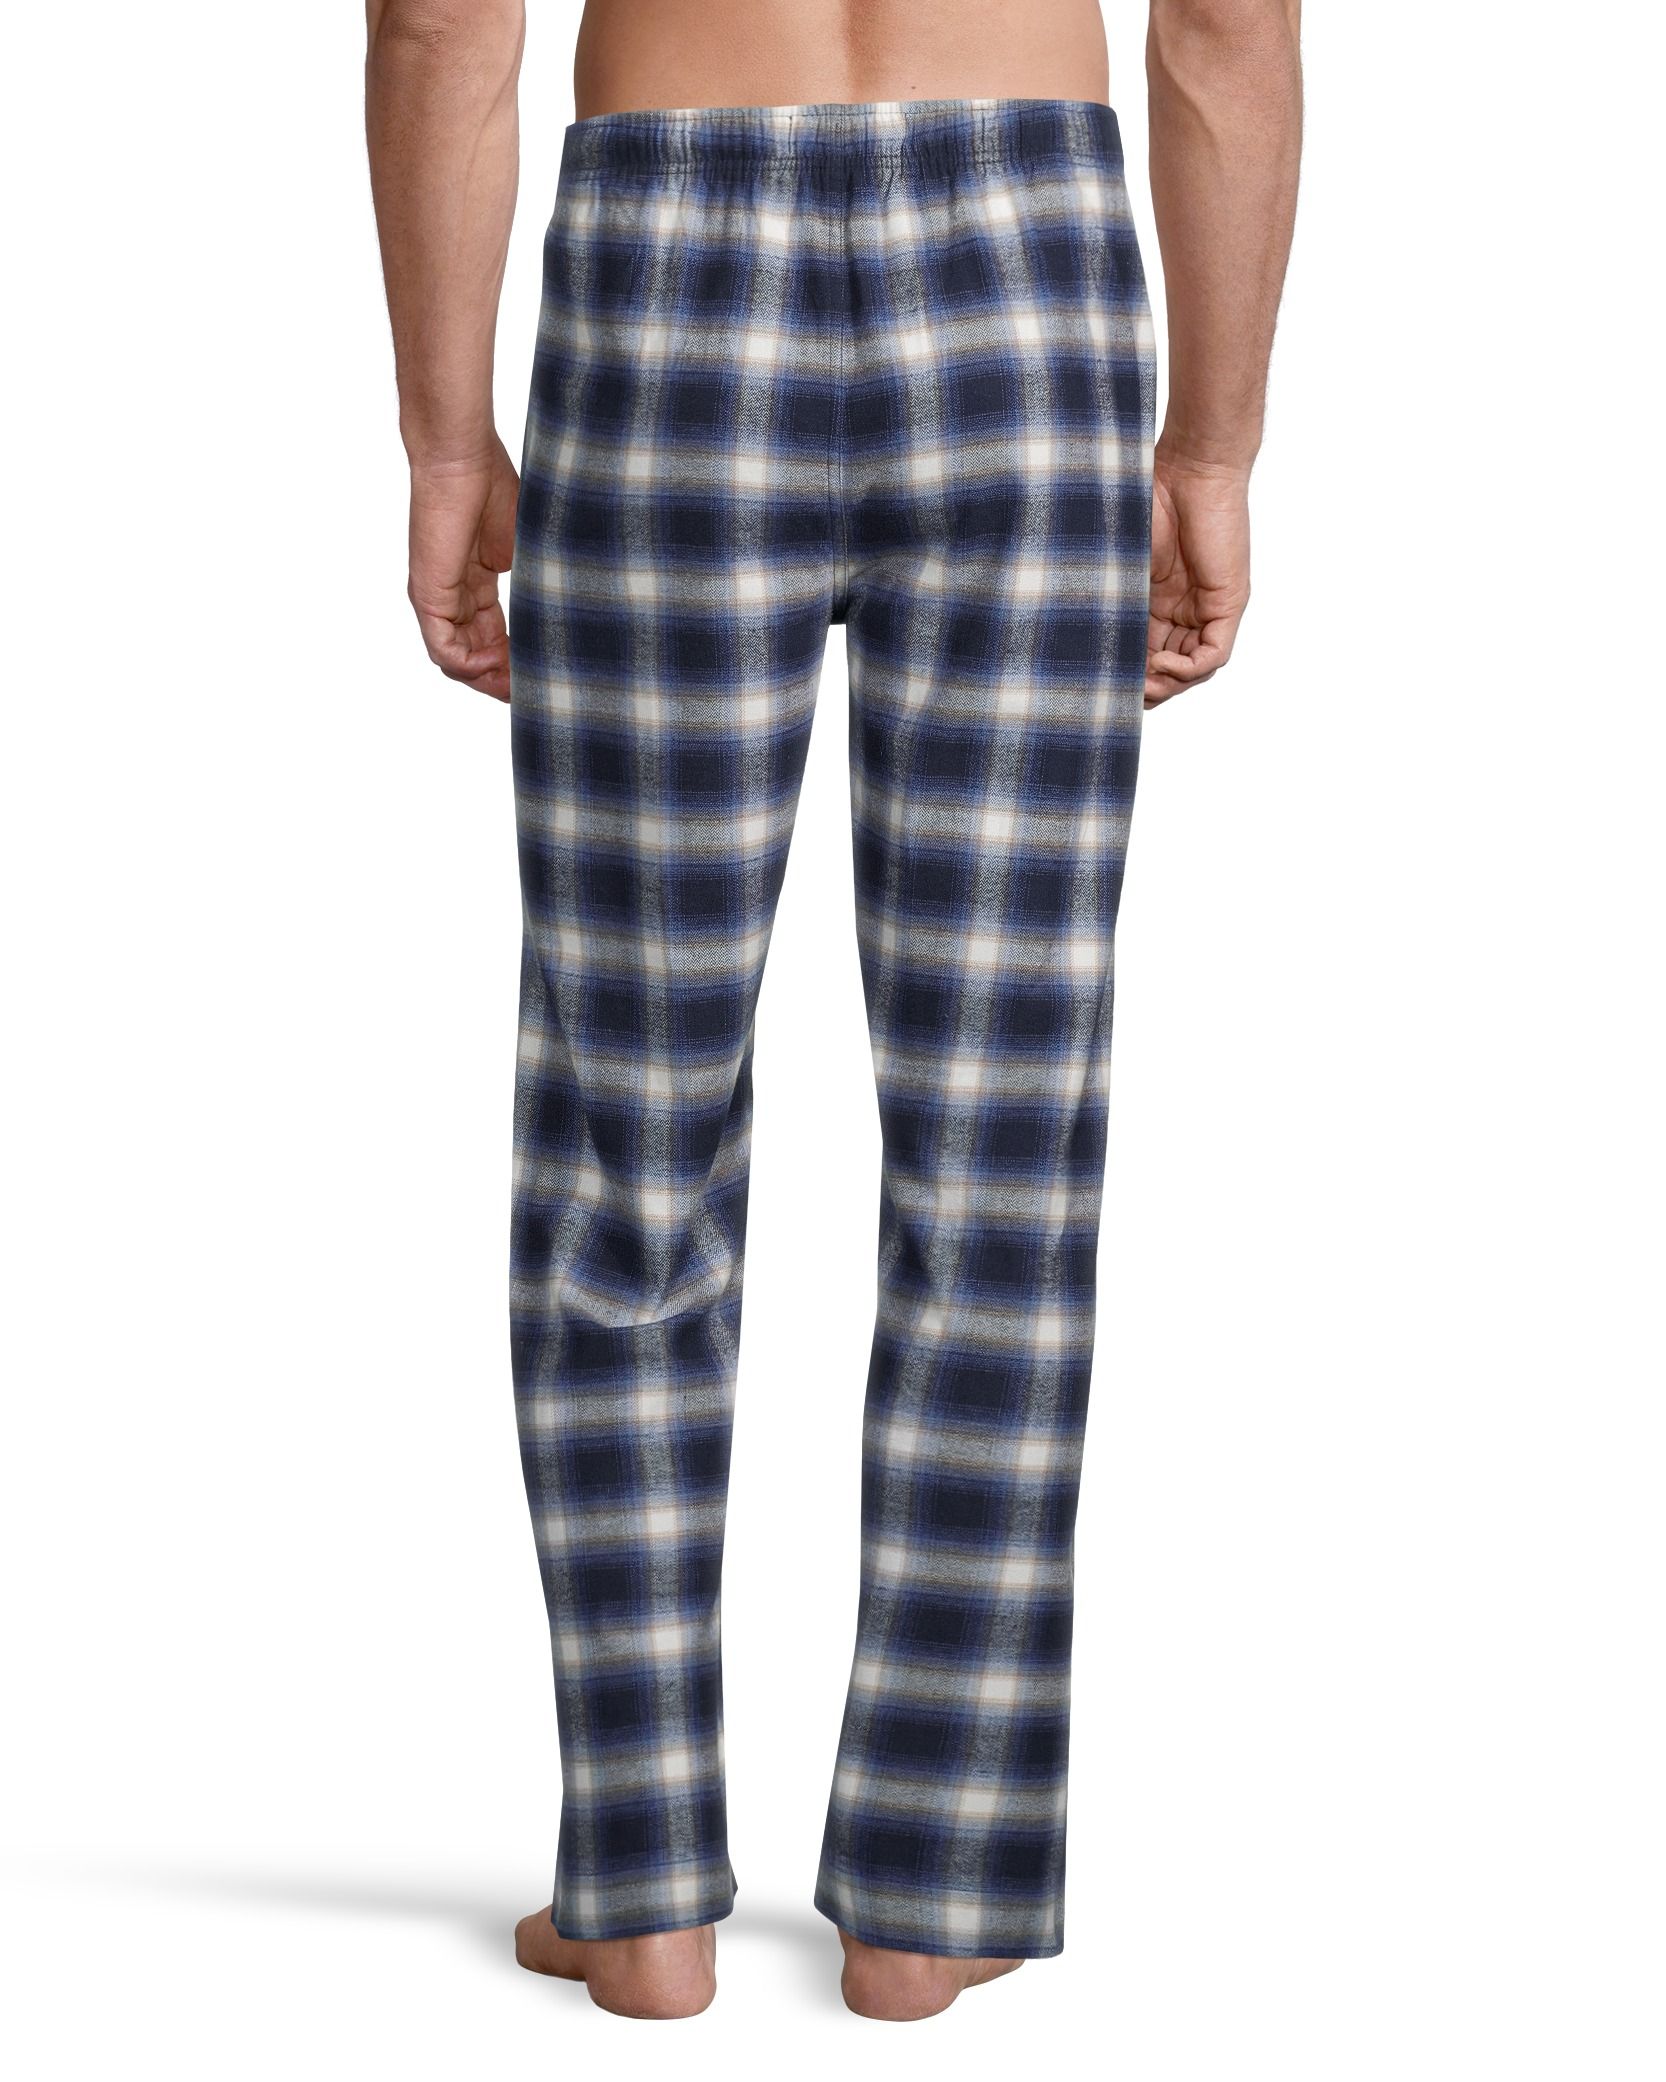 https://media-www.marks.com/product/marks-work-wearhouse/industrial-world/mens-underwear-and-loungewear/410034683108/denver-hayes-men-s-flannel-plaid-lounge-pants-73ccbd40-f2ad-41a2-8f8e-d34278b690f5-jpgrendition.jpg?imdensity=1&imwidth=1244&impolicy=mZoom